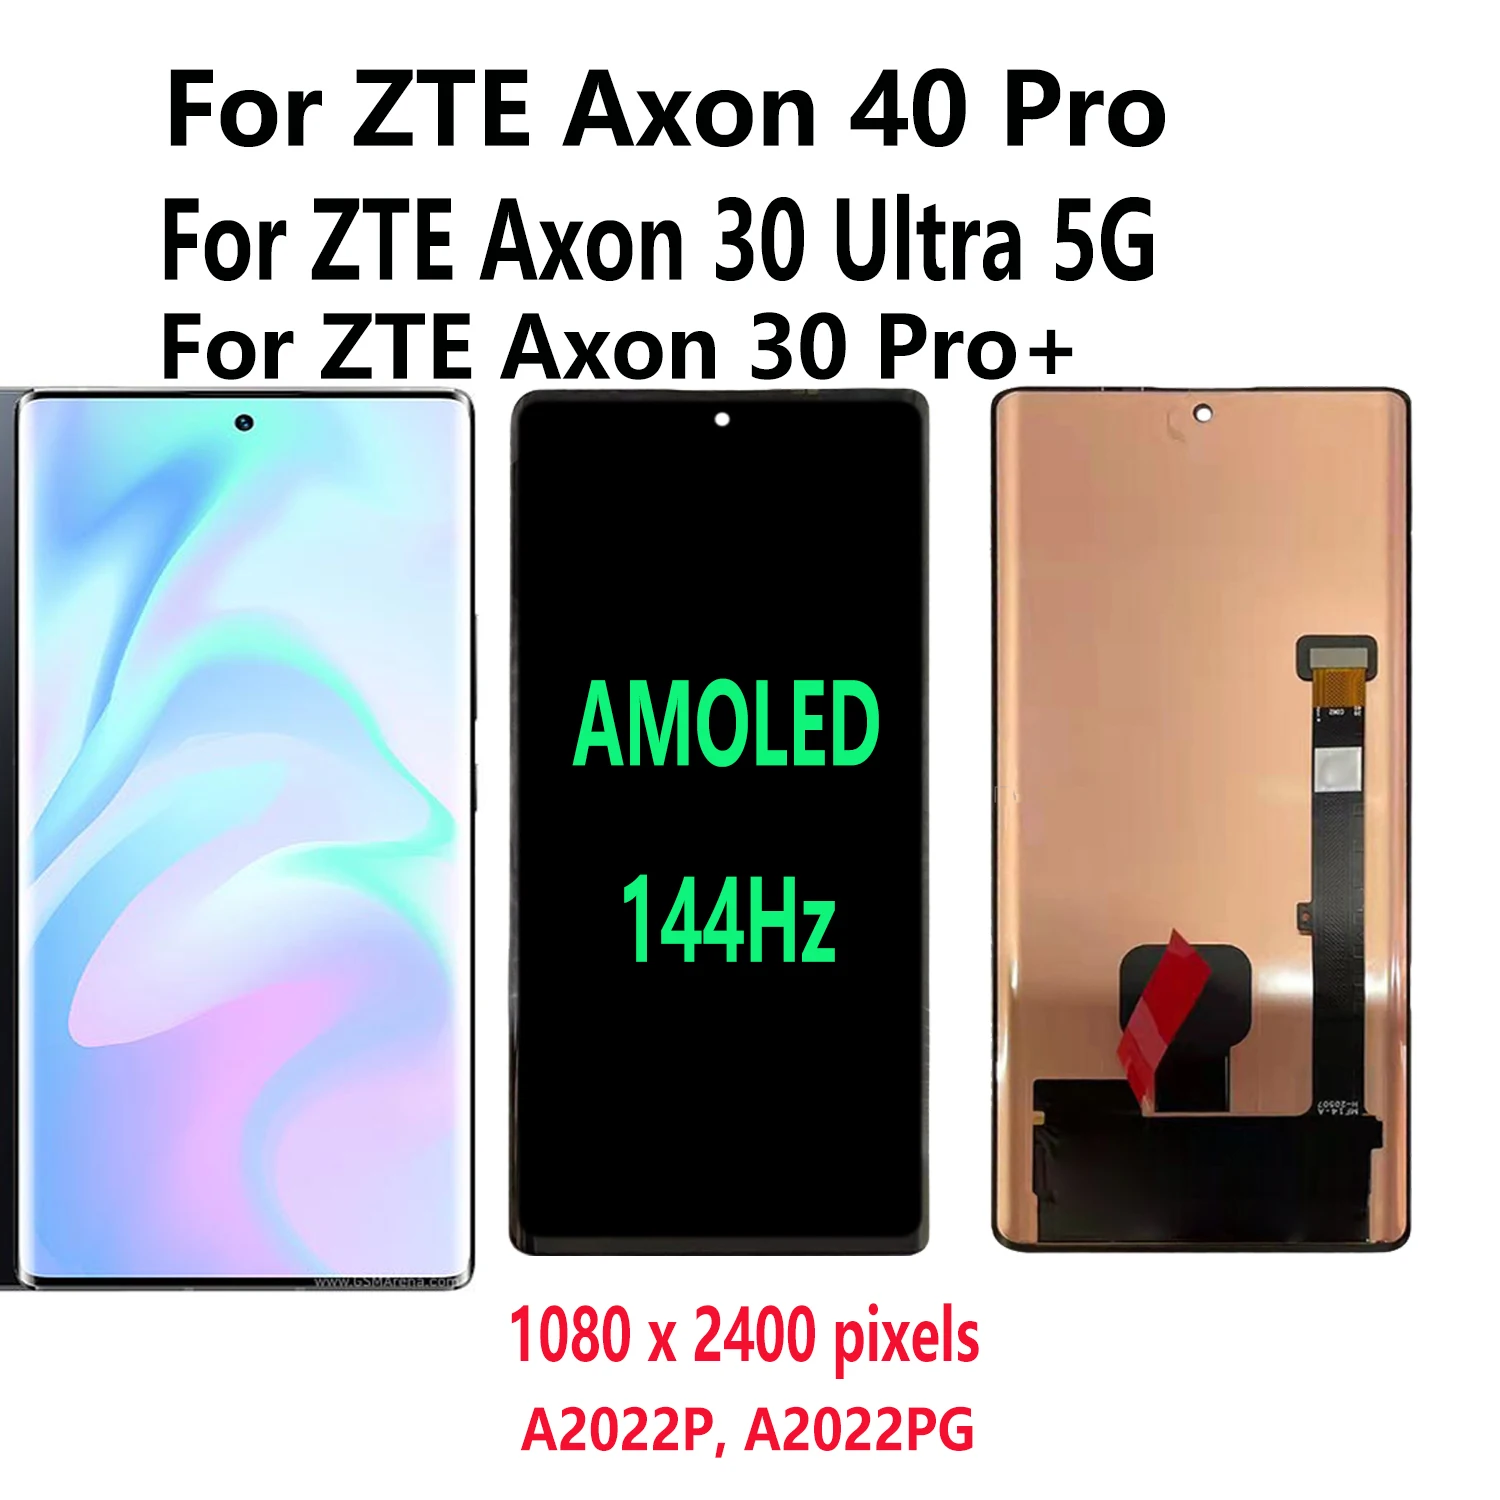 

AMOLED 144HZ LCD Dipslay Touch Screen Digitizer Glass Panel For ZTE Axon 30 Ultra,Axon 40 PRO A2022P A2022PG